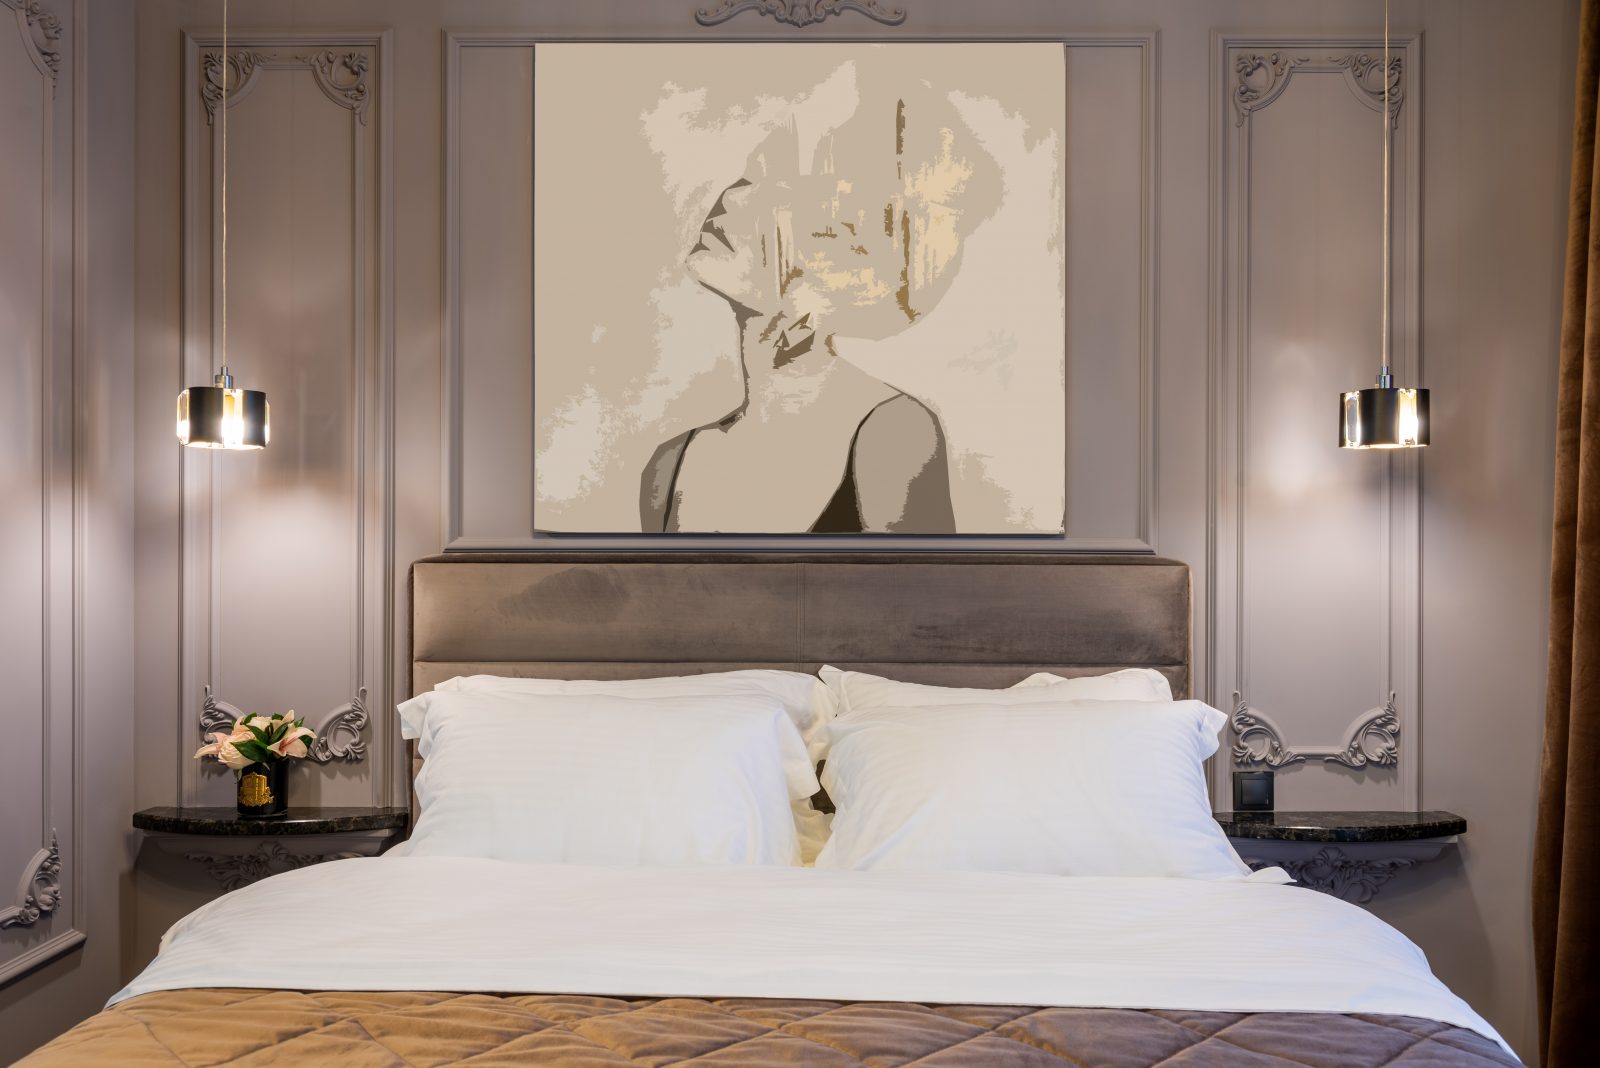 Modern bedroom interior with soft bed under painting of woman